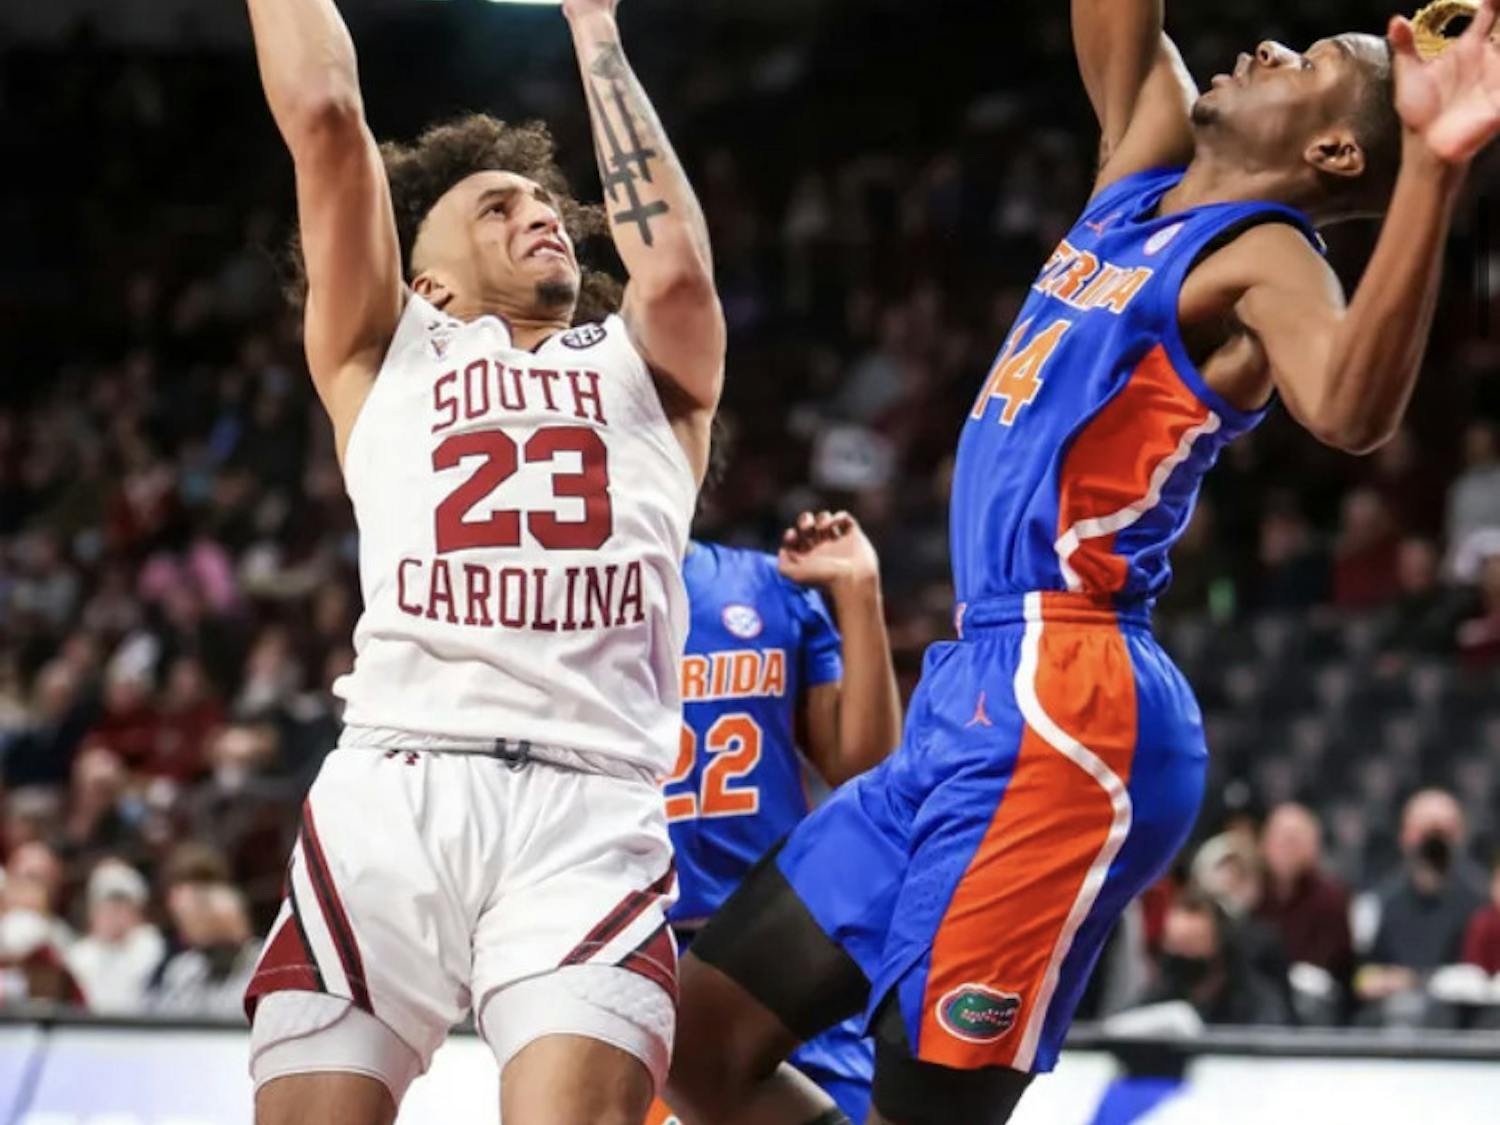 Kowacie Reeves defends South Carolina guard Devin Carter in the first half of Florida’s Jan. 15 game against South Carolina